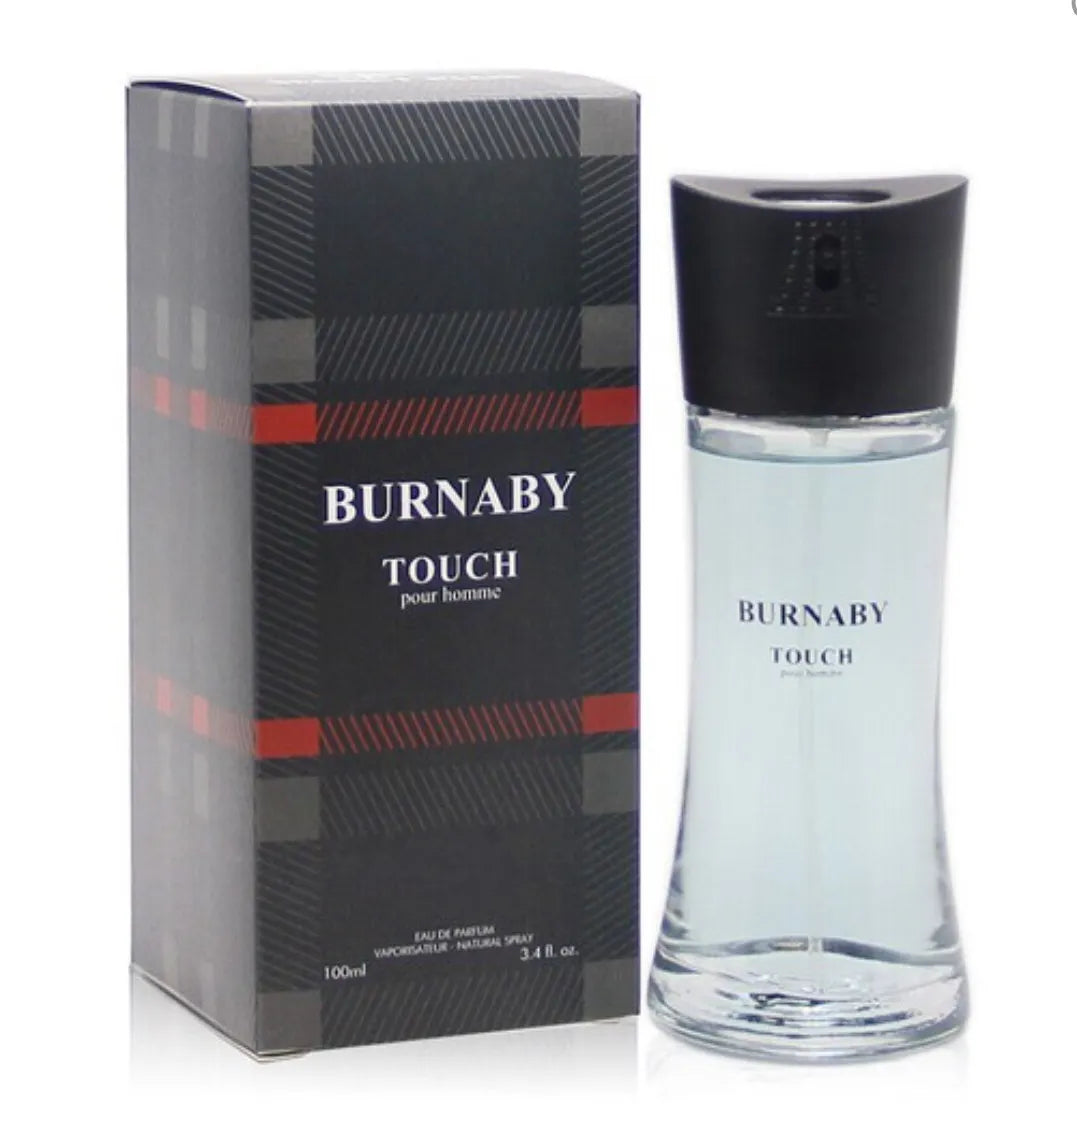 Burnaby touch perfume men